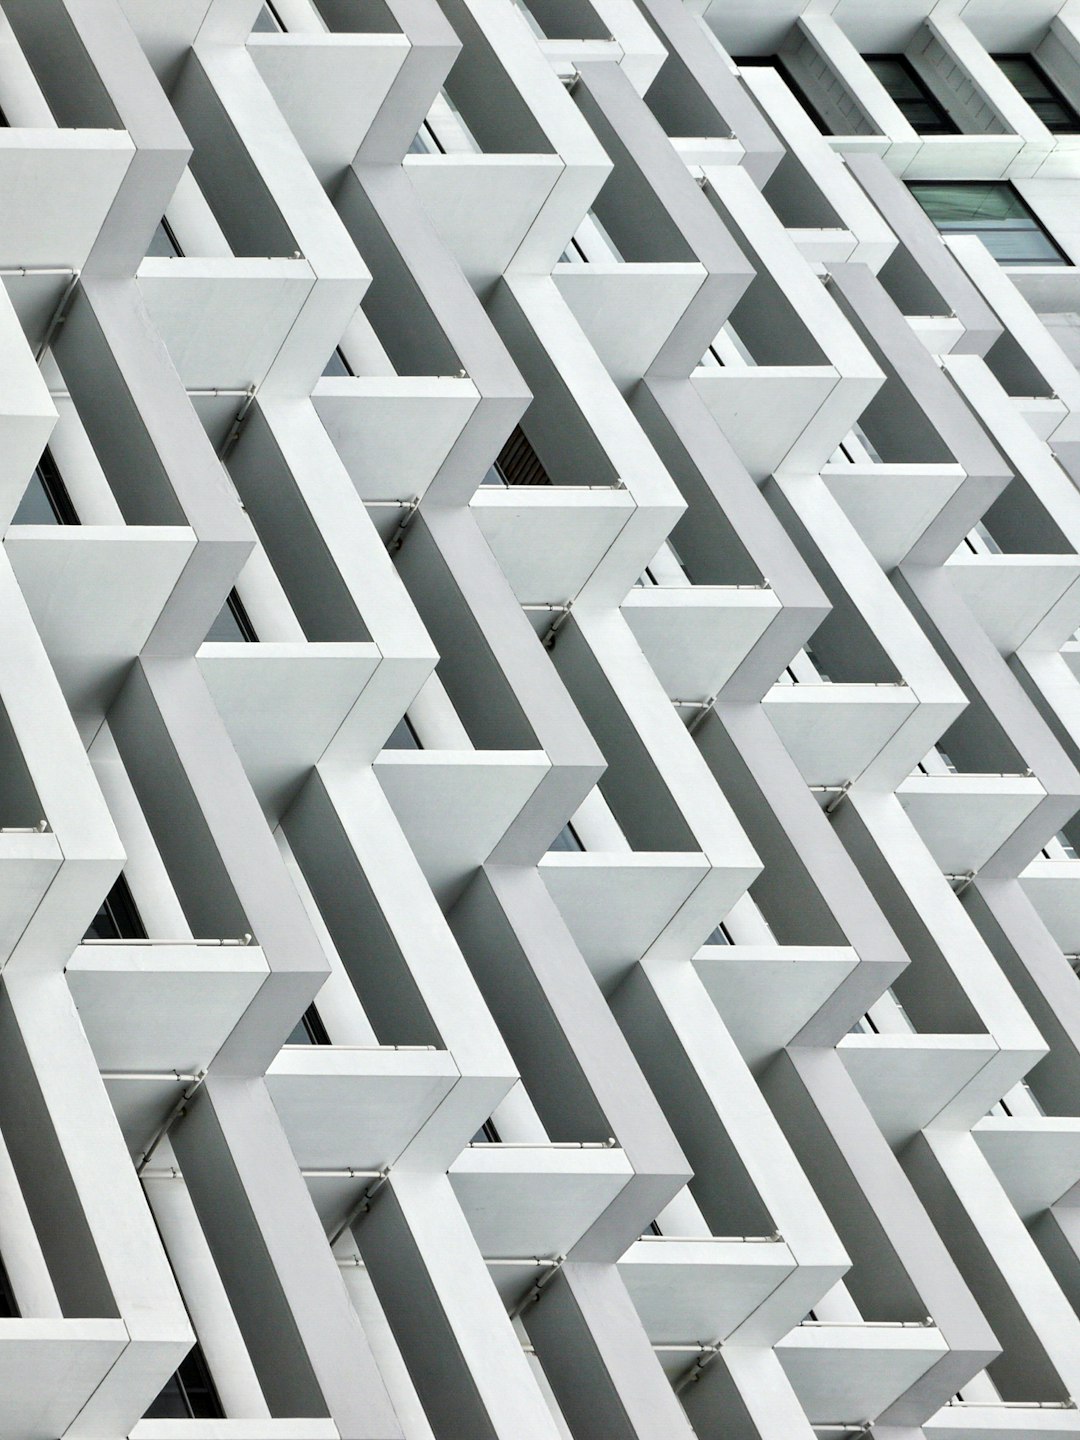 White angular architecture building facade with repeating pattern of triangles in a white and grey color palette, photographed at high resolution in the style of photography.